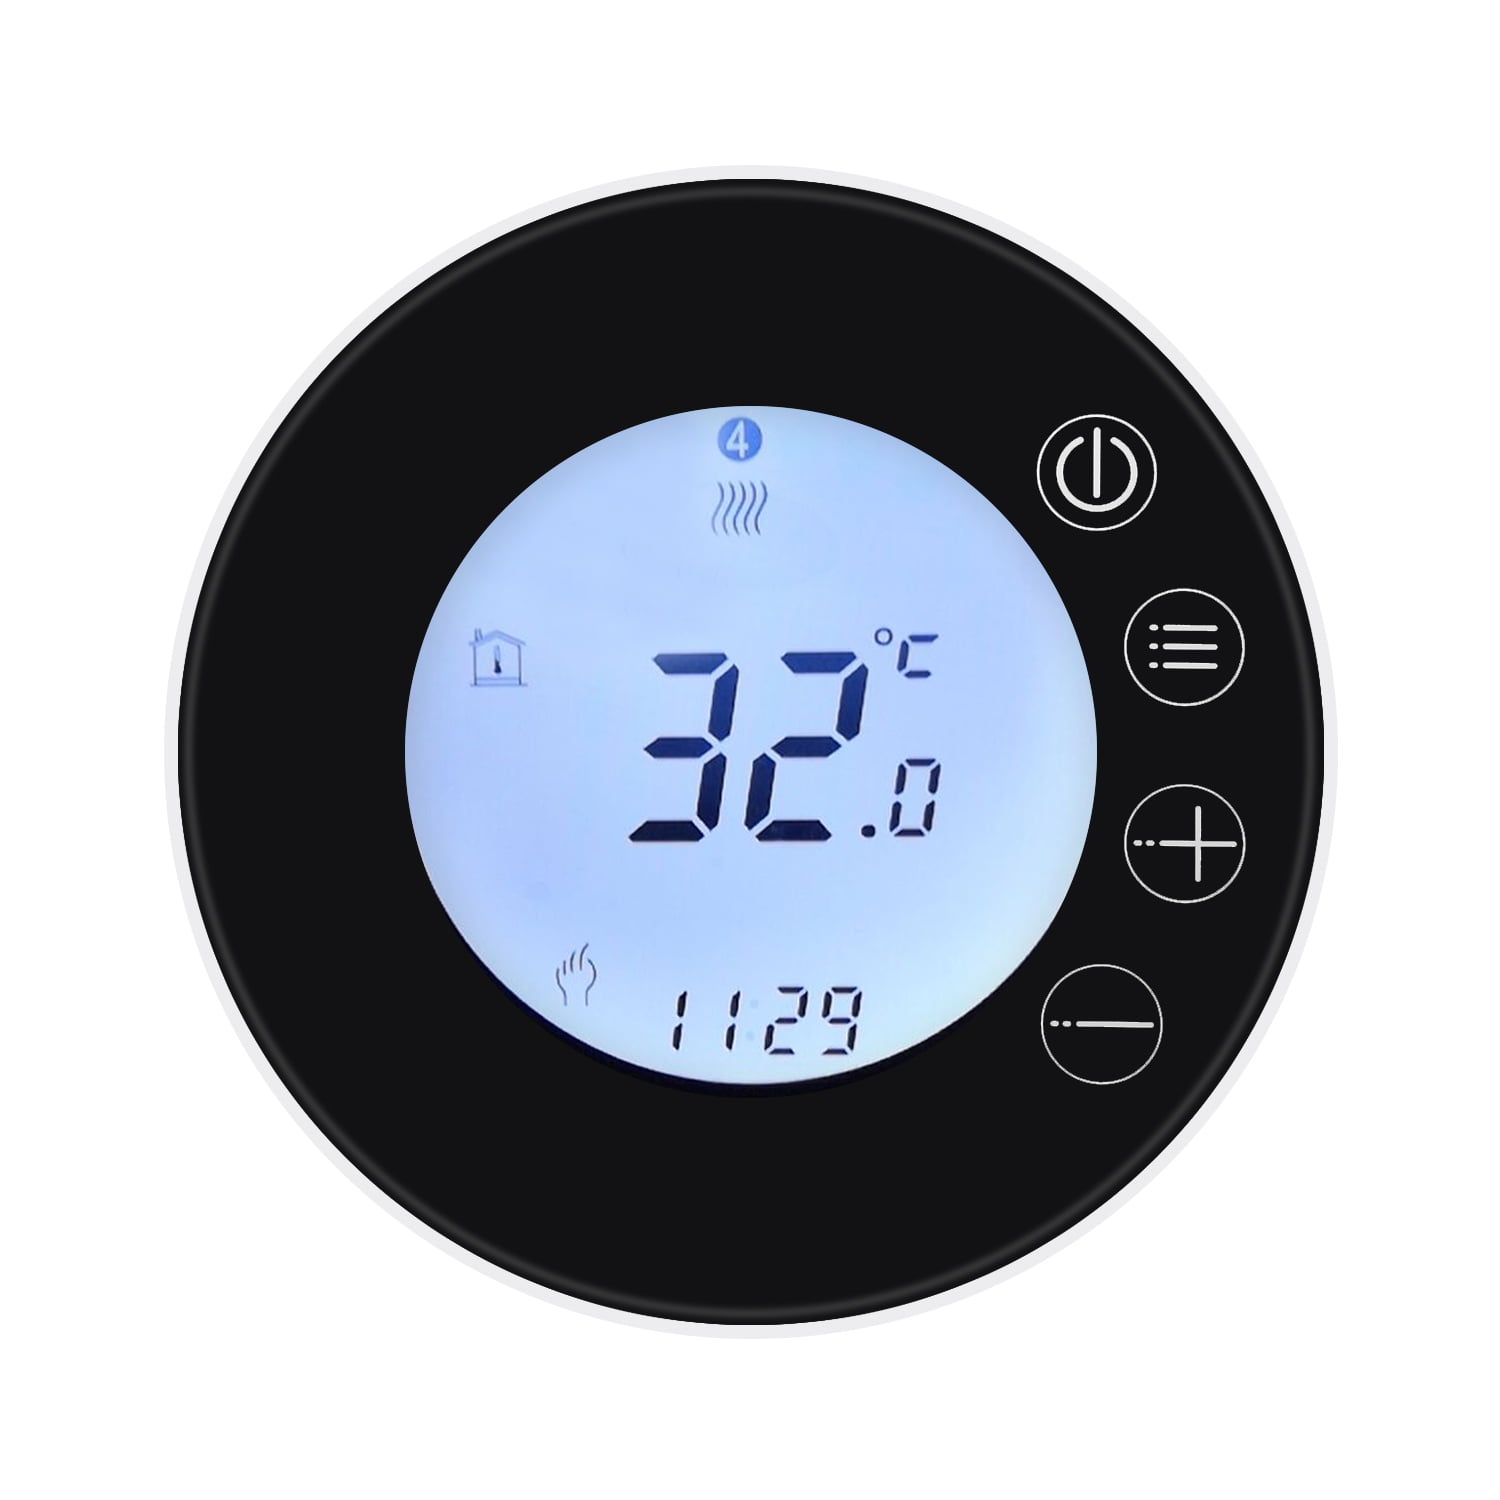 Docooler Tuya WiFi LCD Display Intelligent Thermostat Programmable  Temperature Controller APP Control Compatible with Home Voice Control 